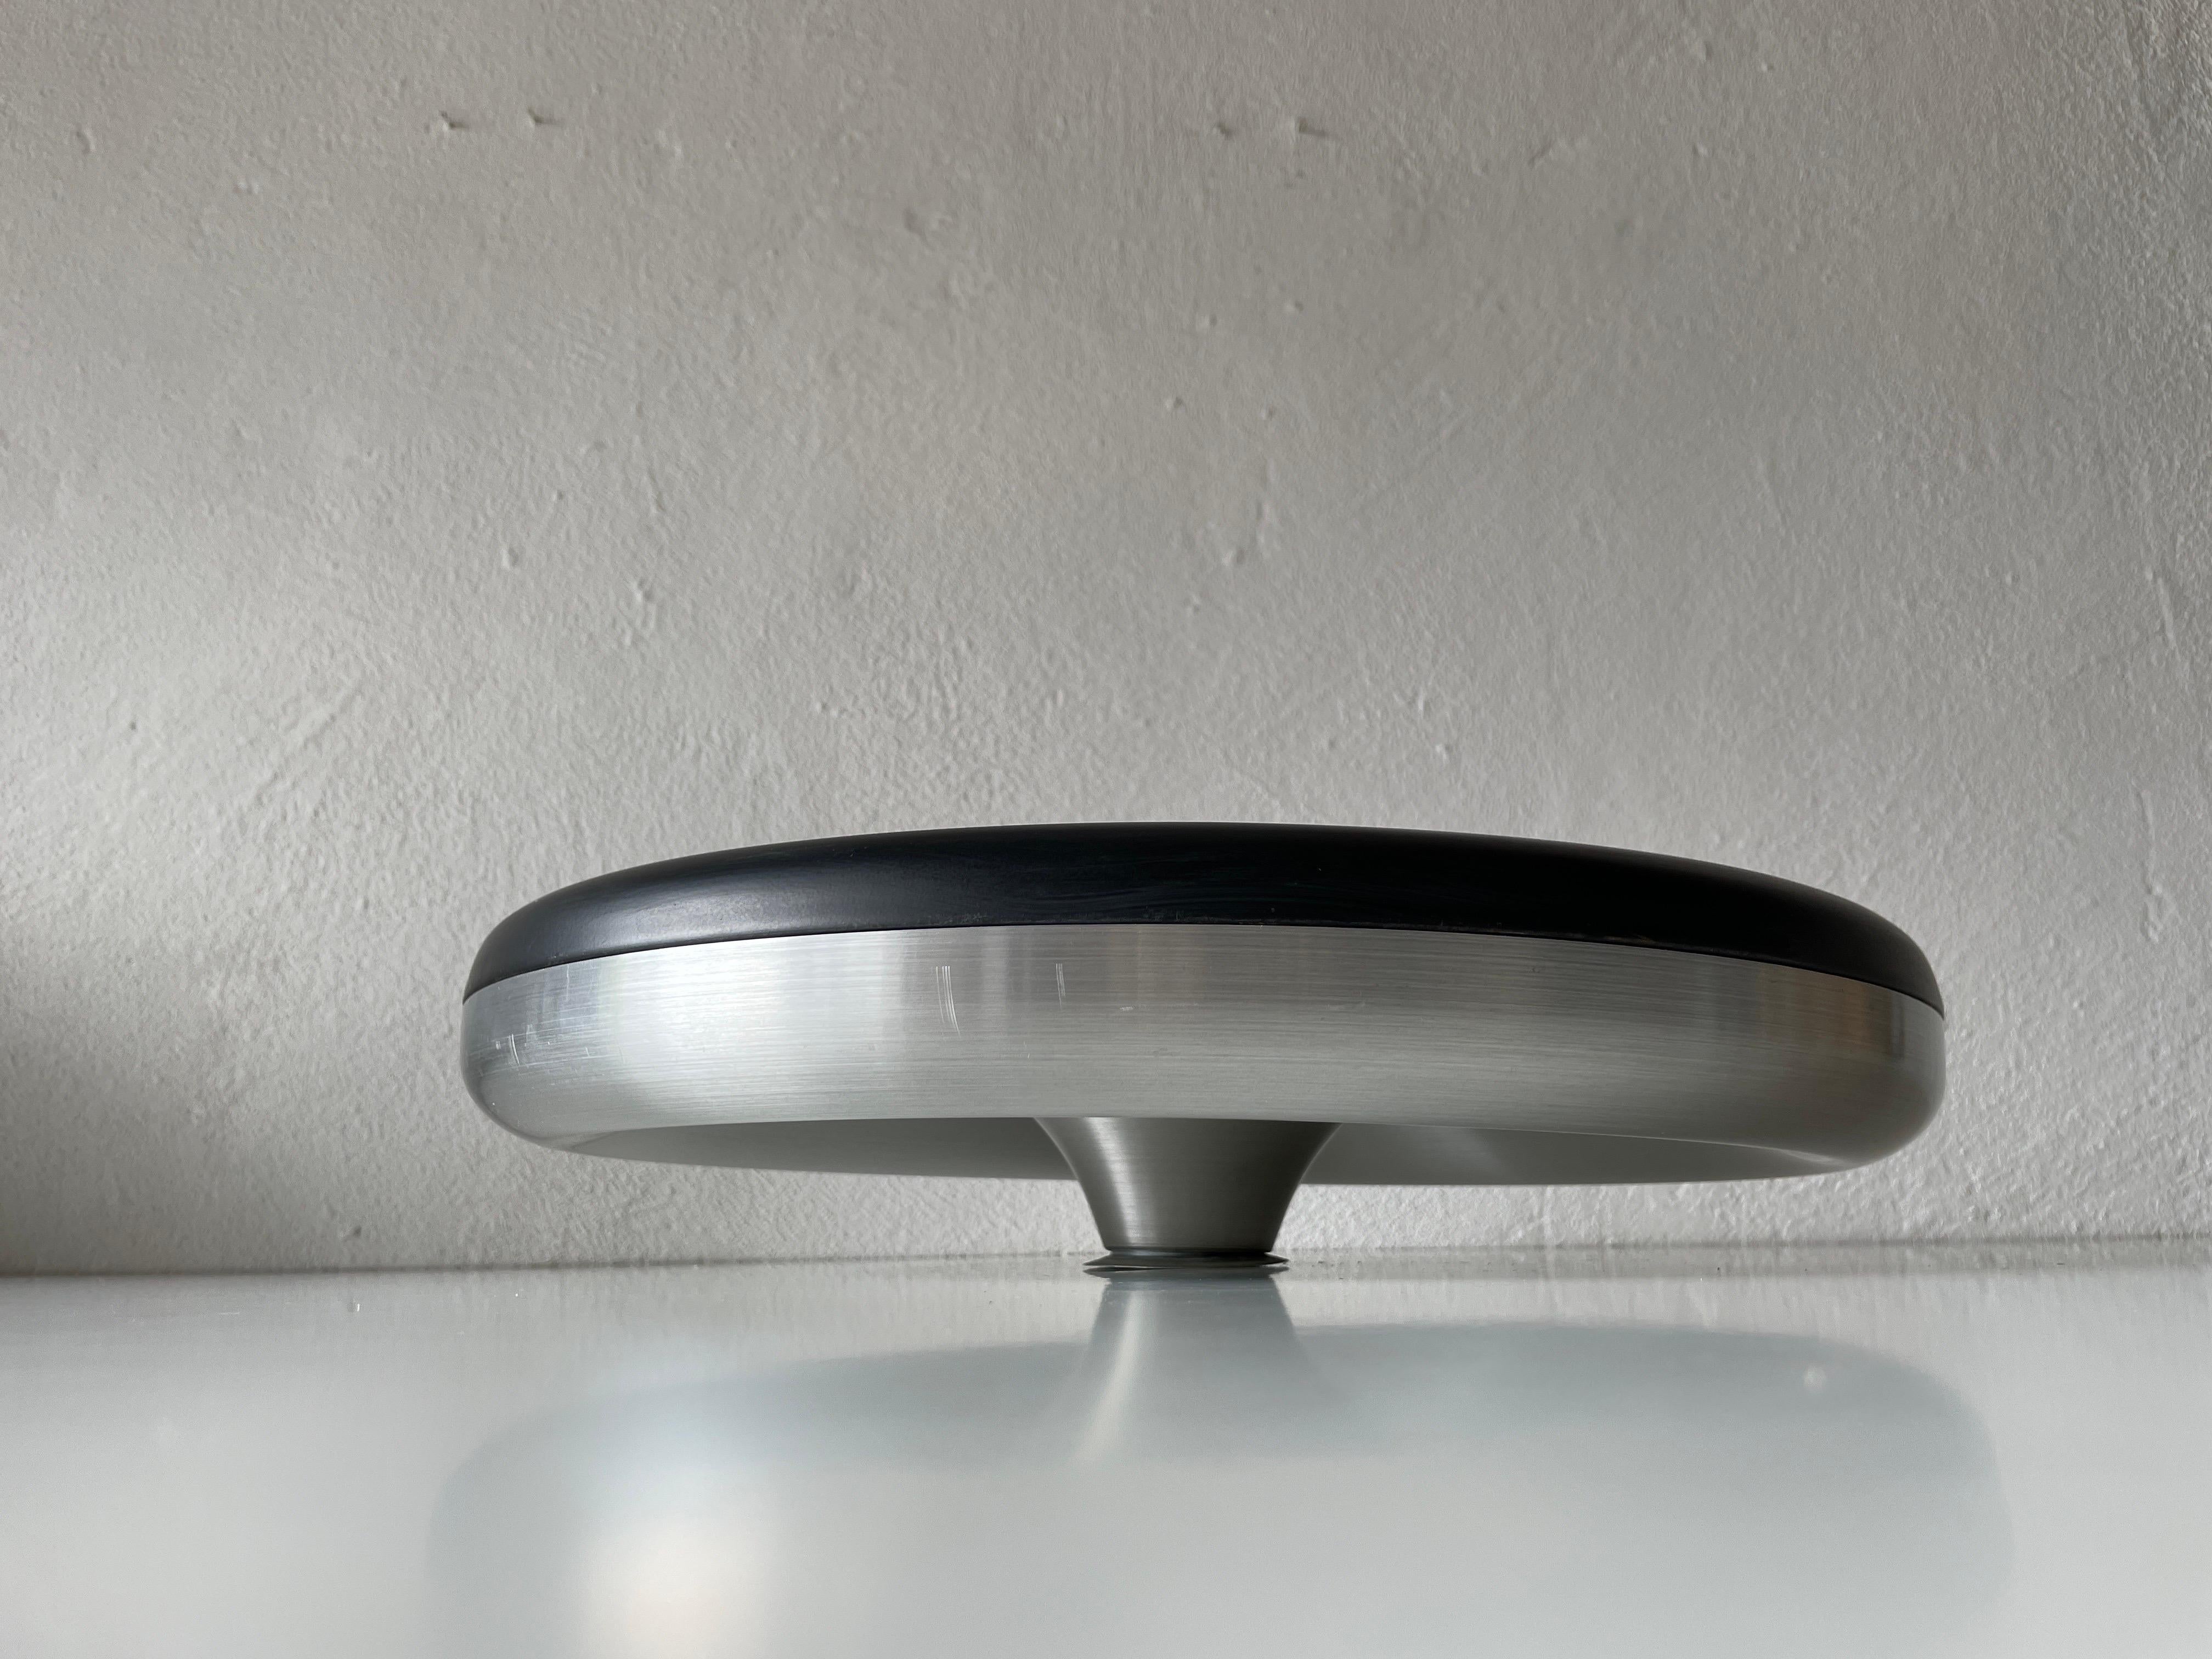 Grey Aluminum and Black Metal Space Age Disc Design Flush Mount, 1970s, Germany For Sale 1